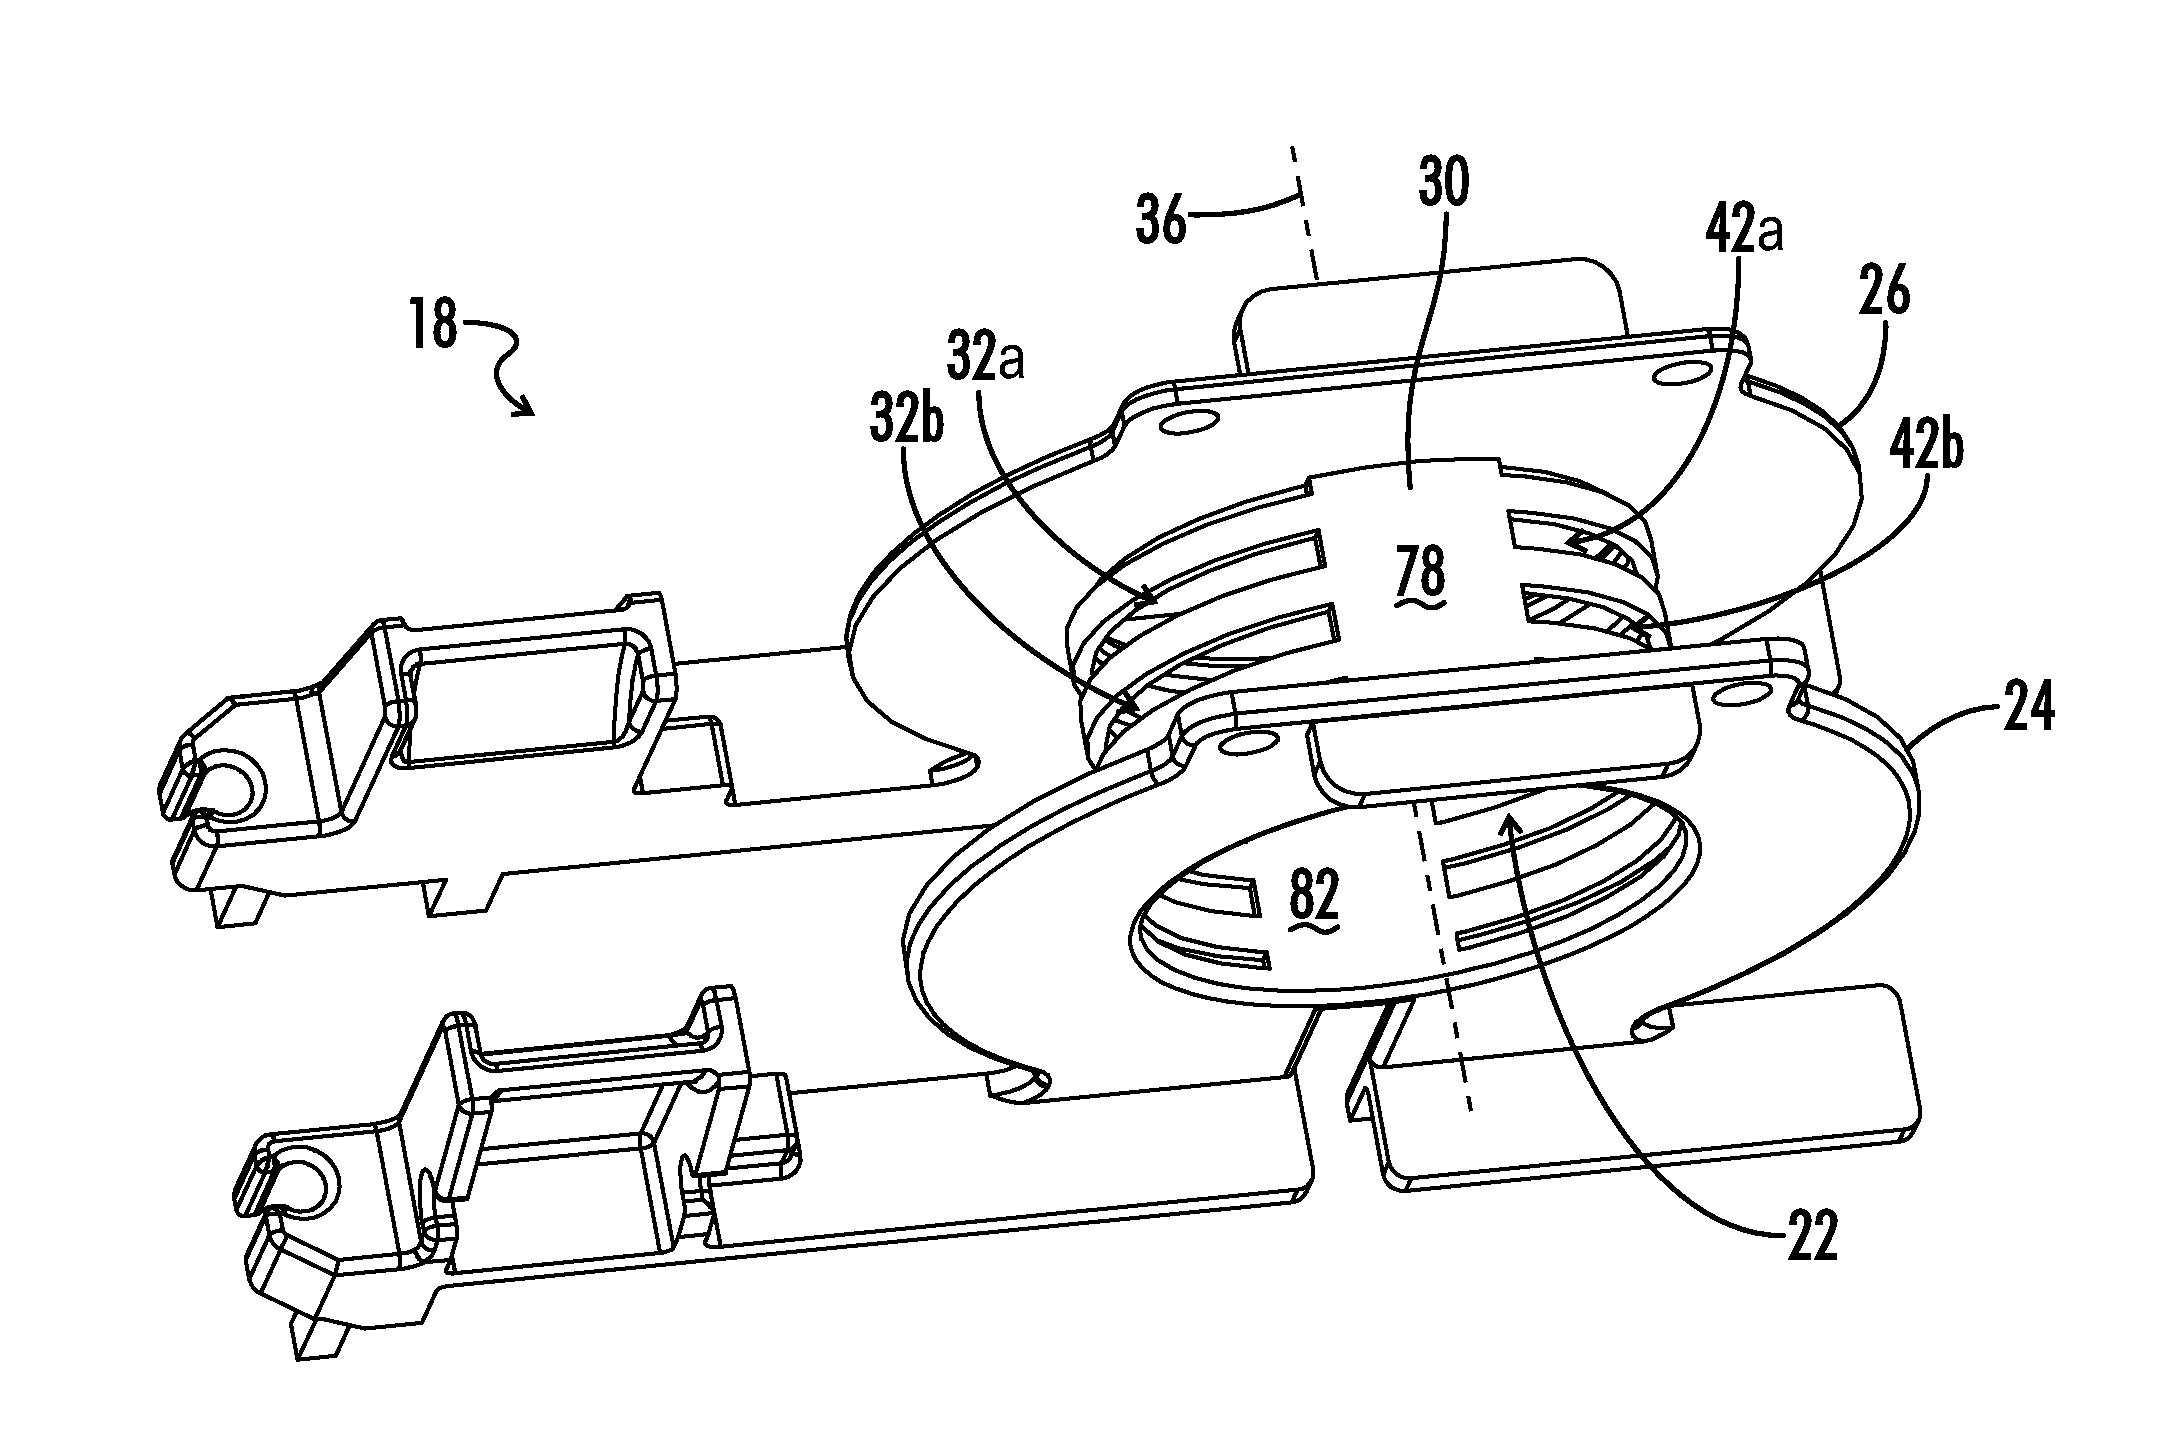 Slotted bobbin magnetic component devices and methods